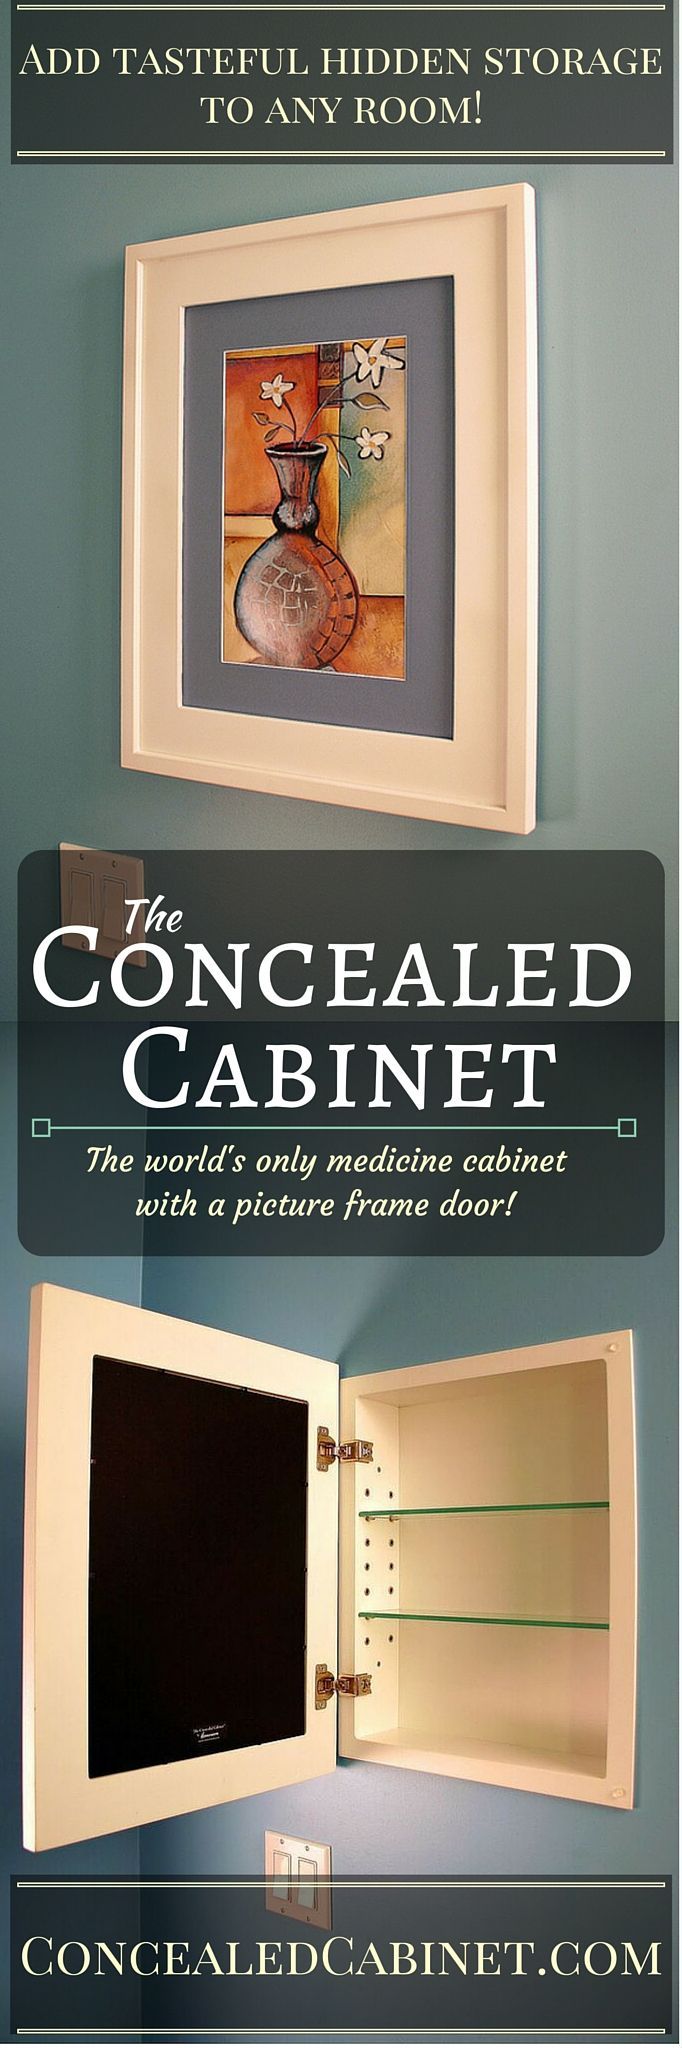 Once installed, our mirrorless medicine cabinets look & operate just like a picture frame hanging